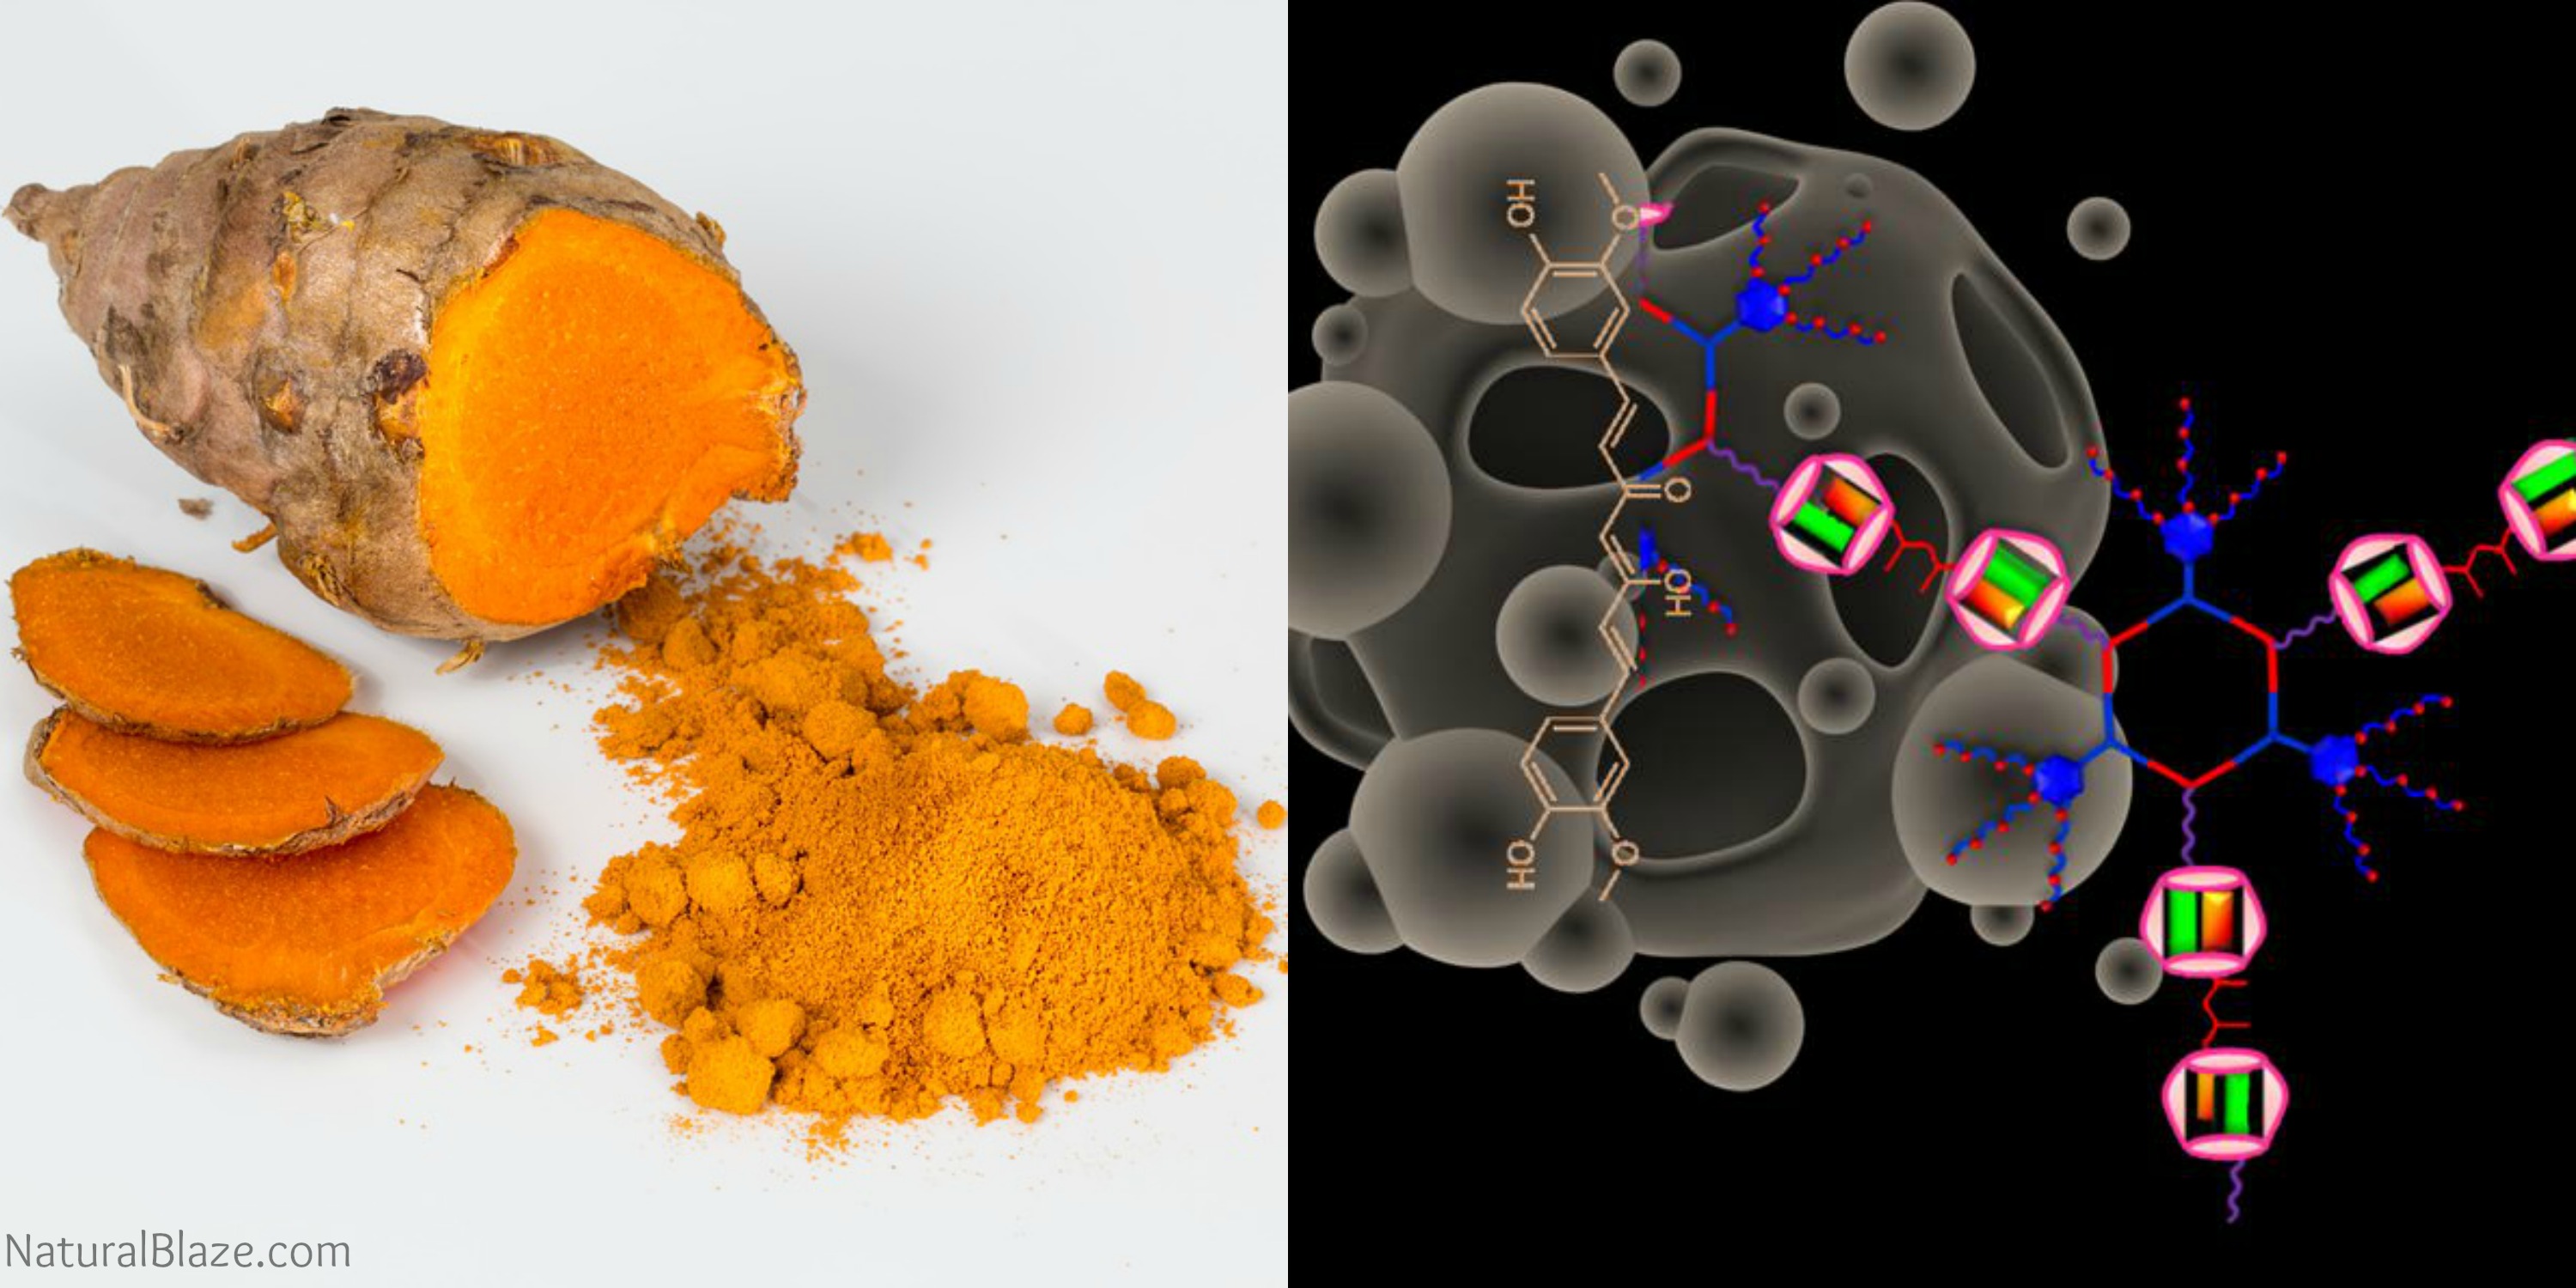 Researchers Develop New Method to Inject Turmeric Cancer Cells